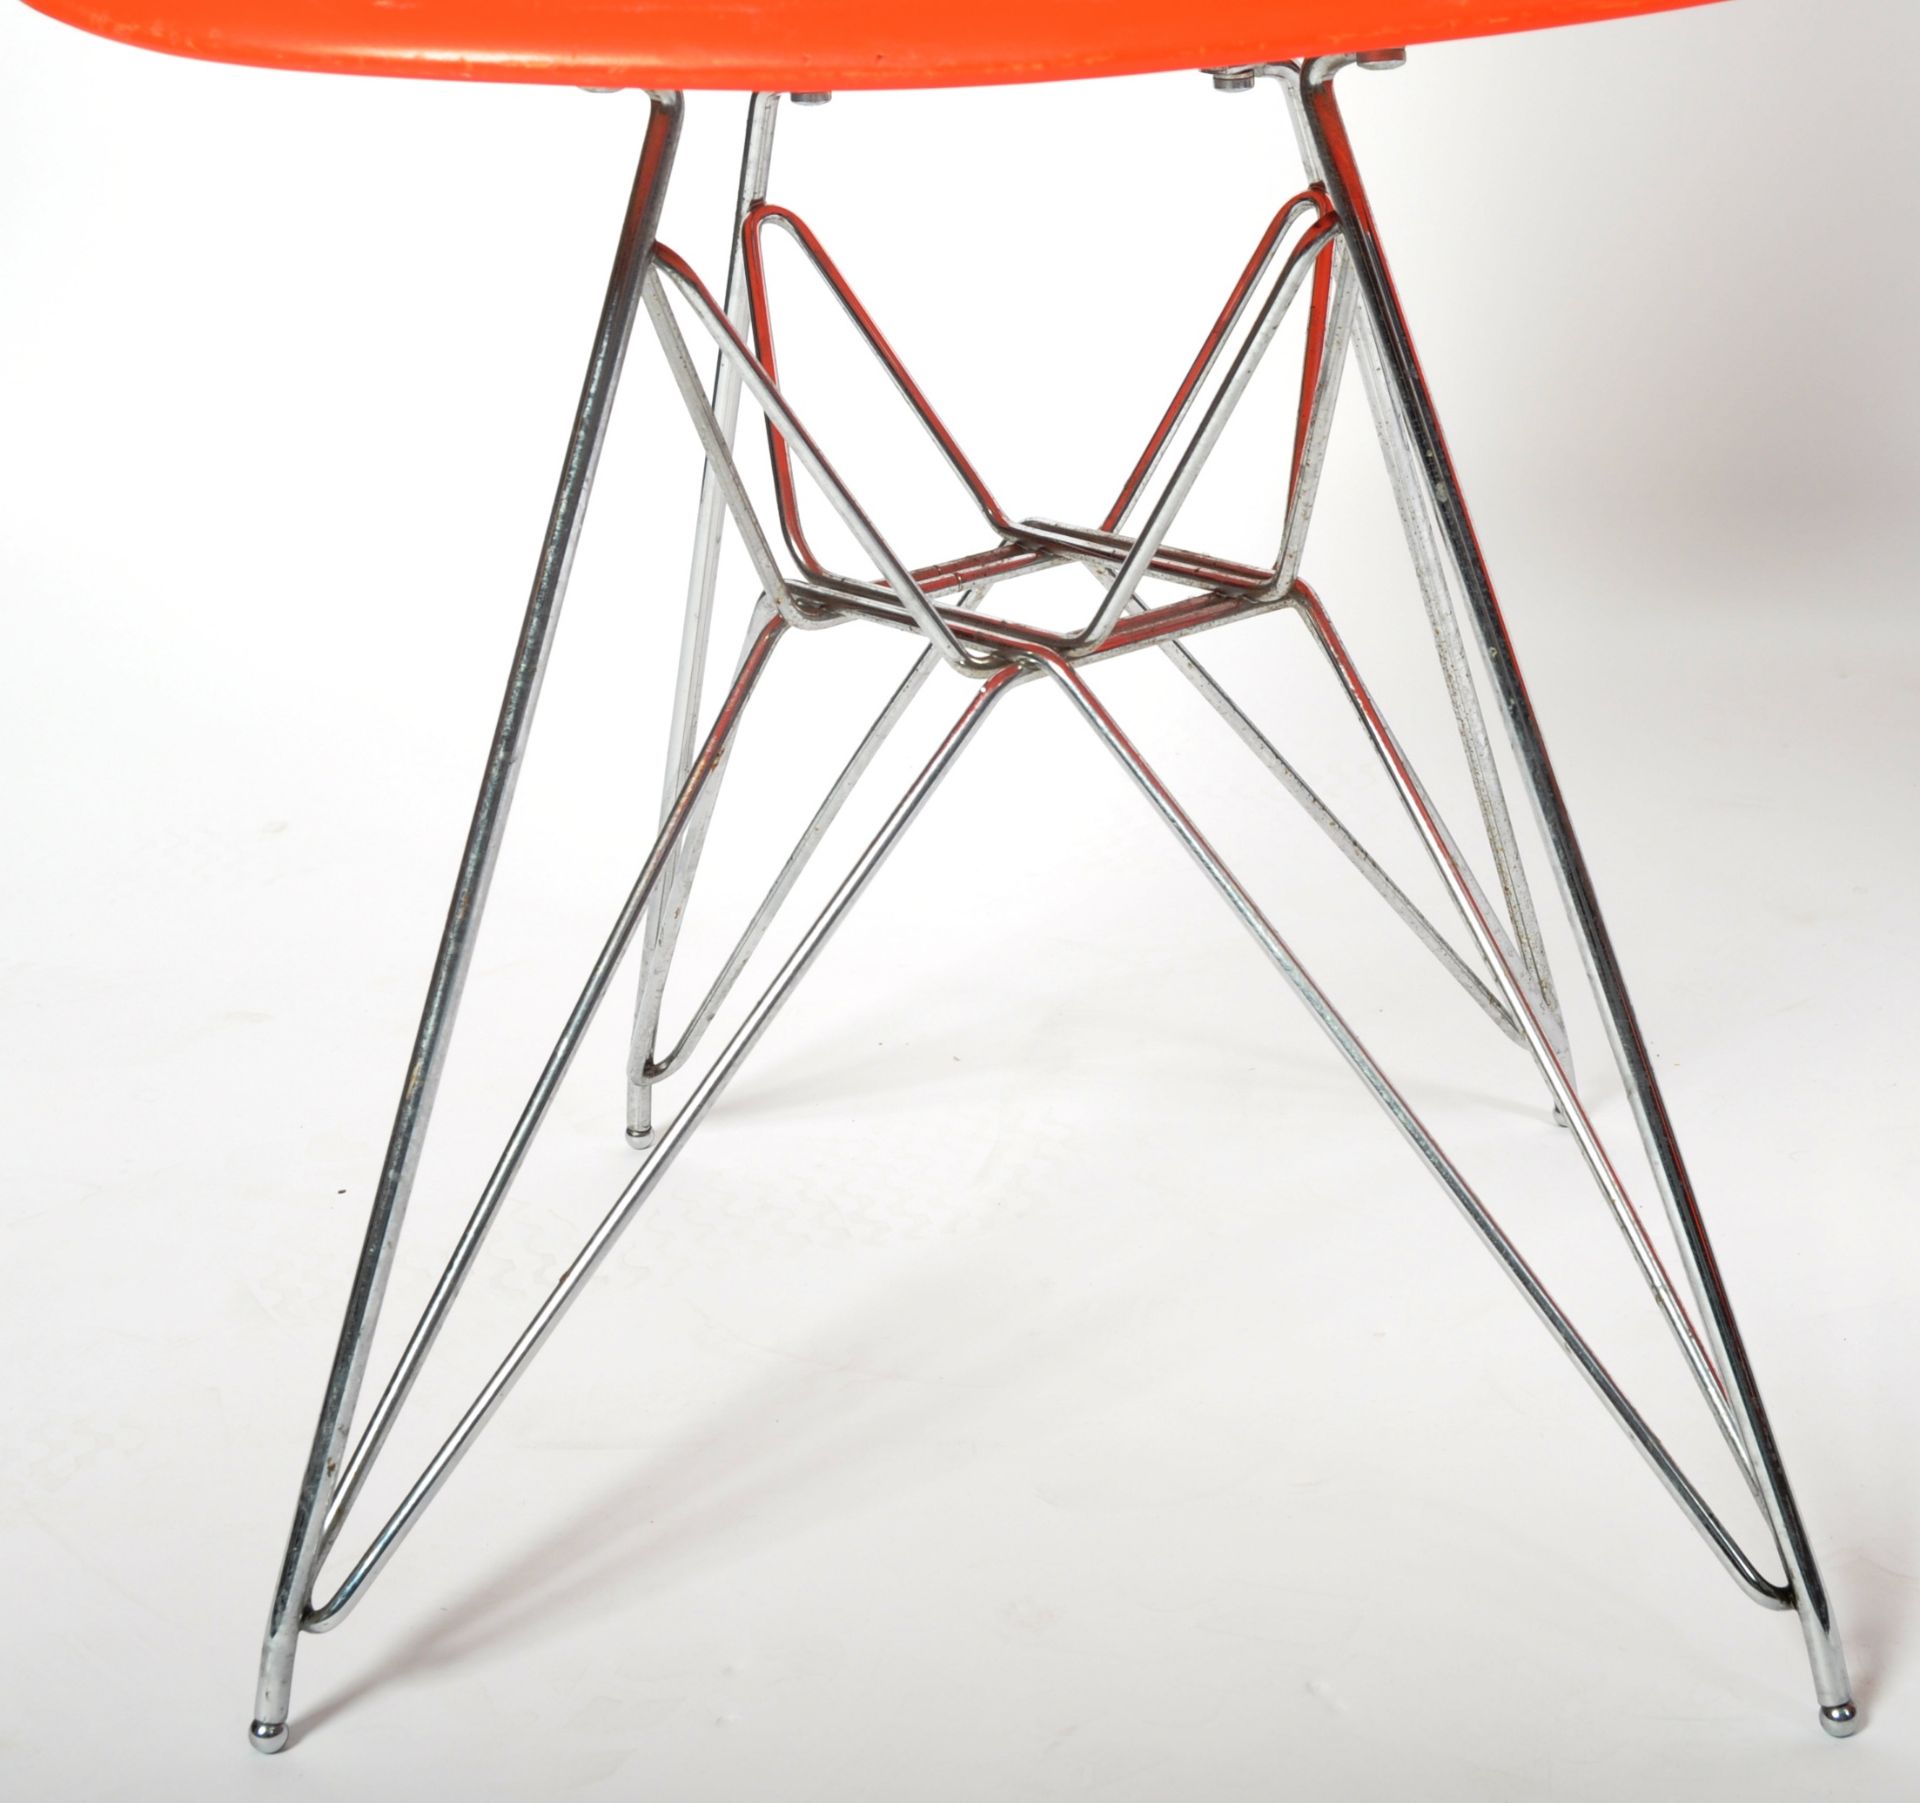 CHARLES & RAY EAMES FOR VITRA - SET OF SIX DSR EAMES PLASTIC CHAIRS - Image 6 of 10